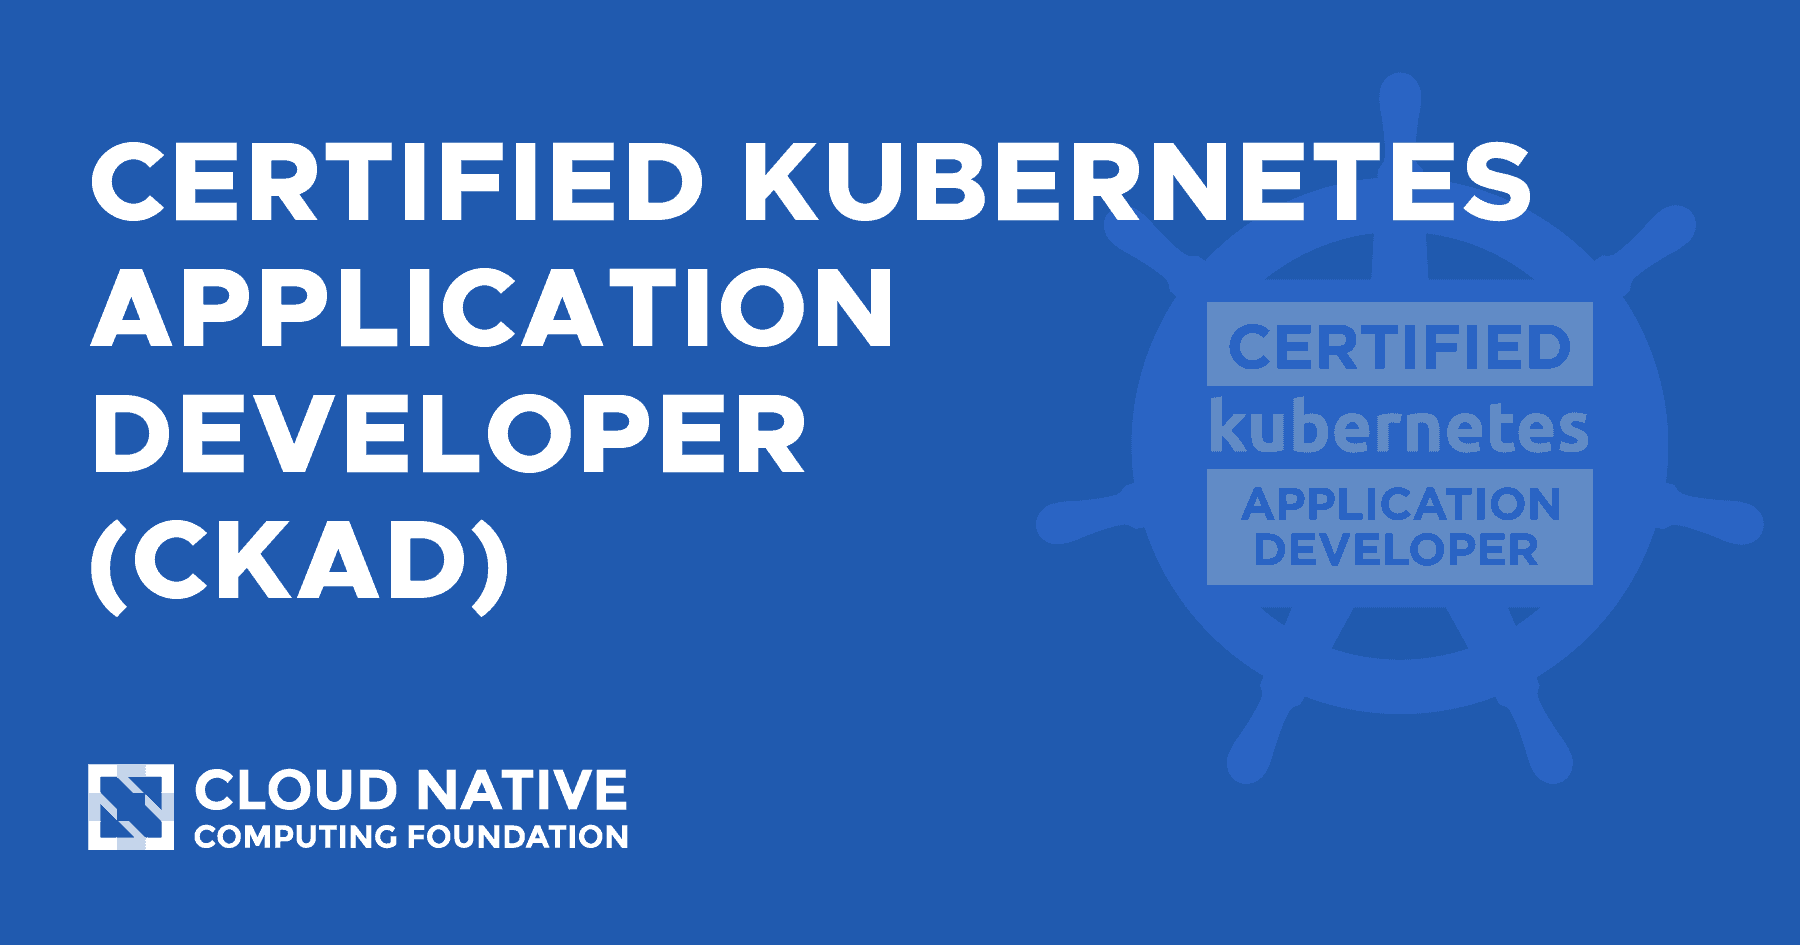 Cracking the Certified Kubernetes Application Developer - CKAD exam in one month